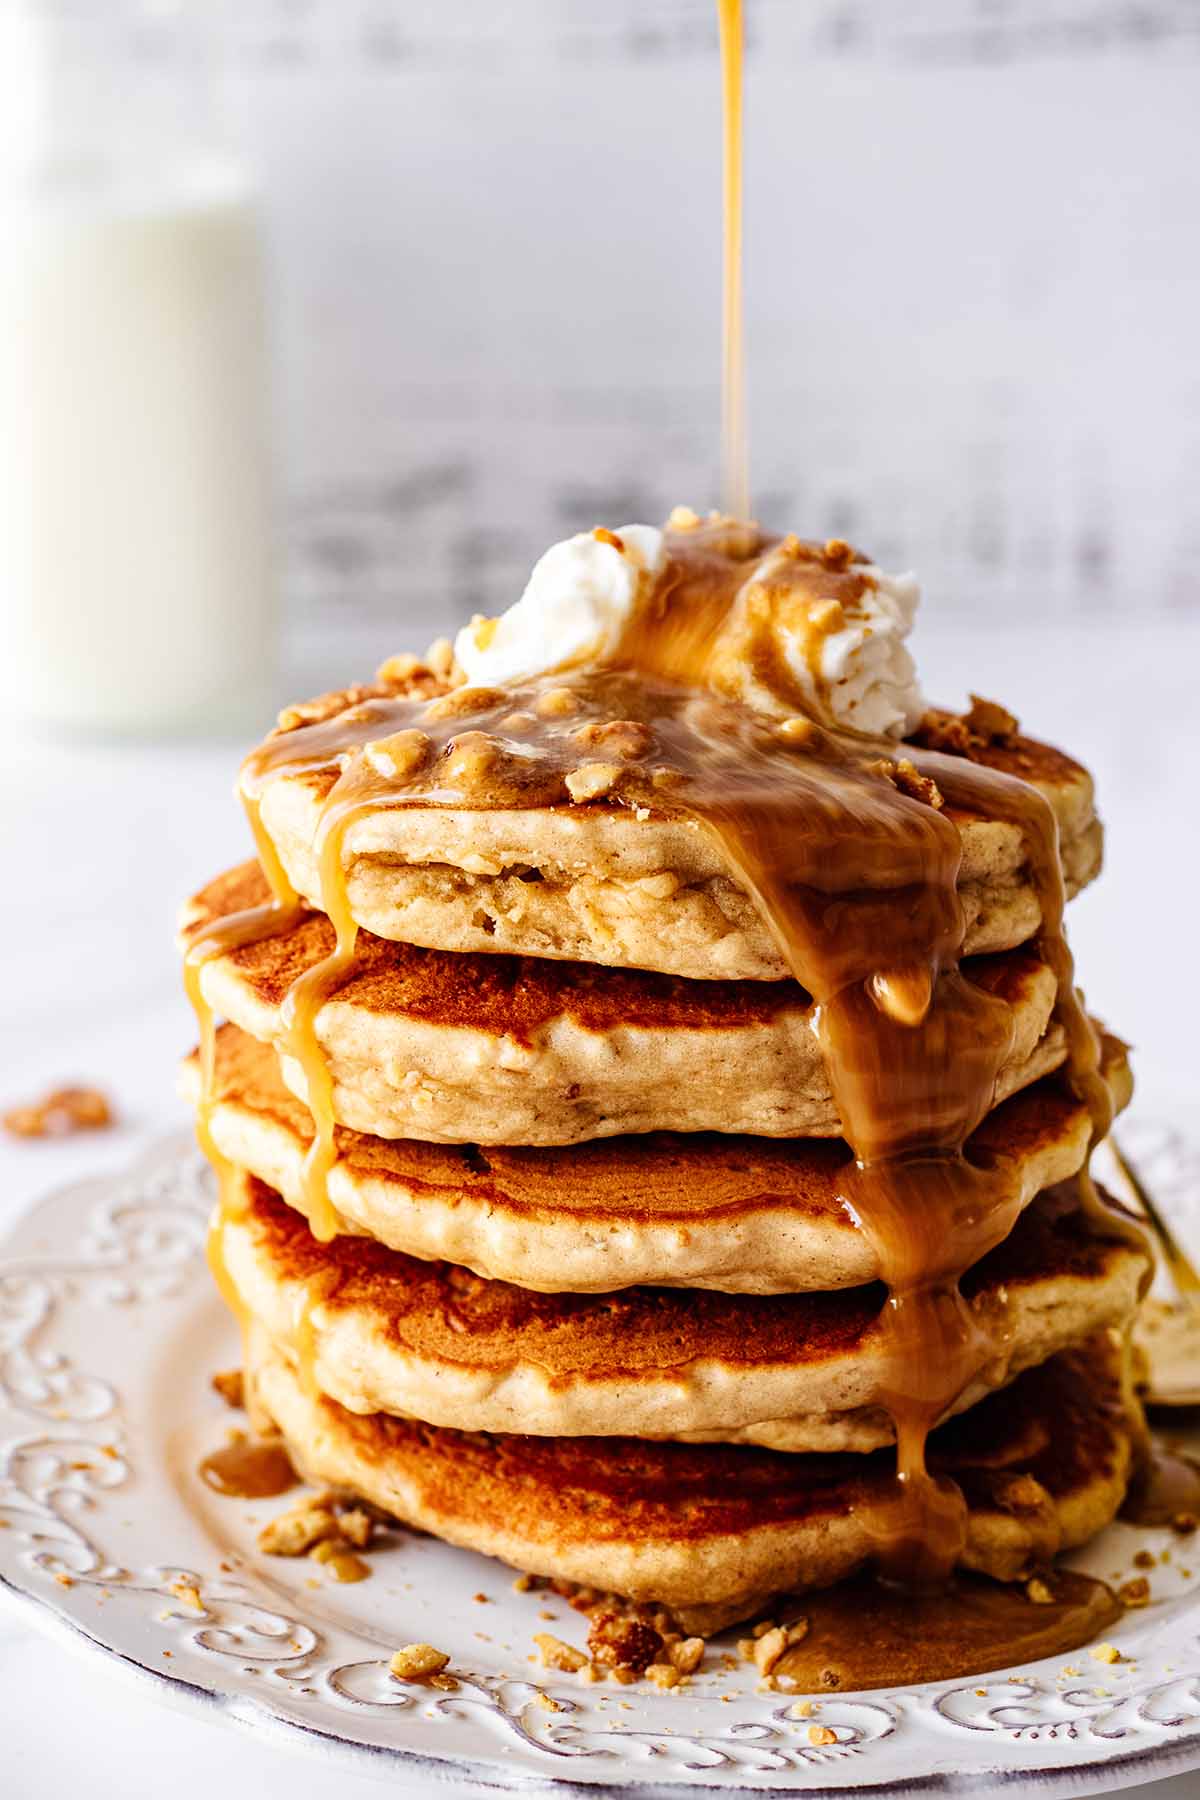 Peanut butter syrup being poured on a stack of peanut butter pancakes on a white plate